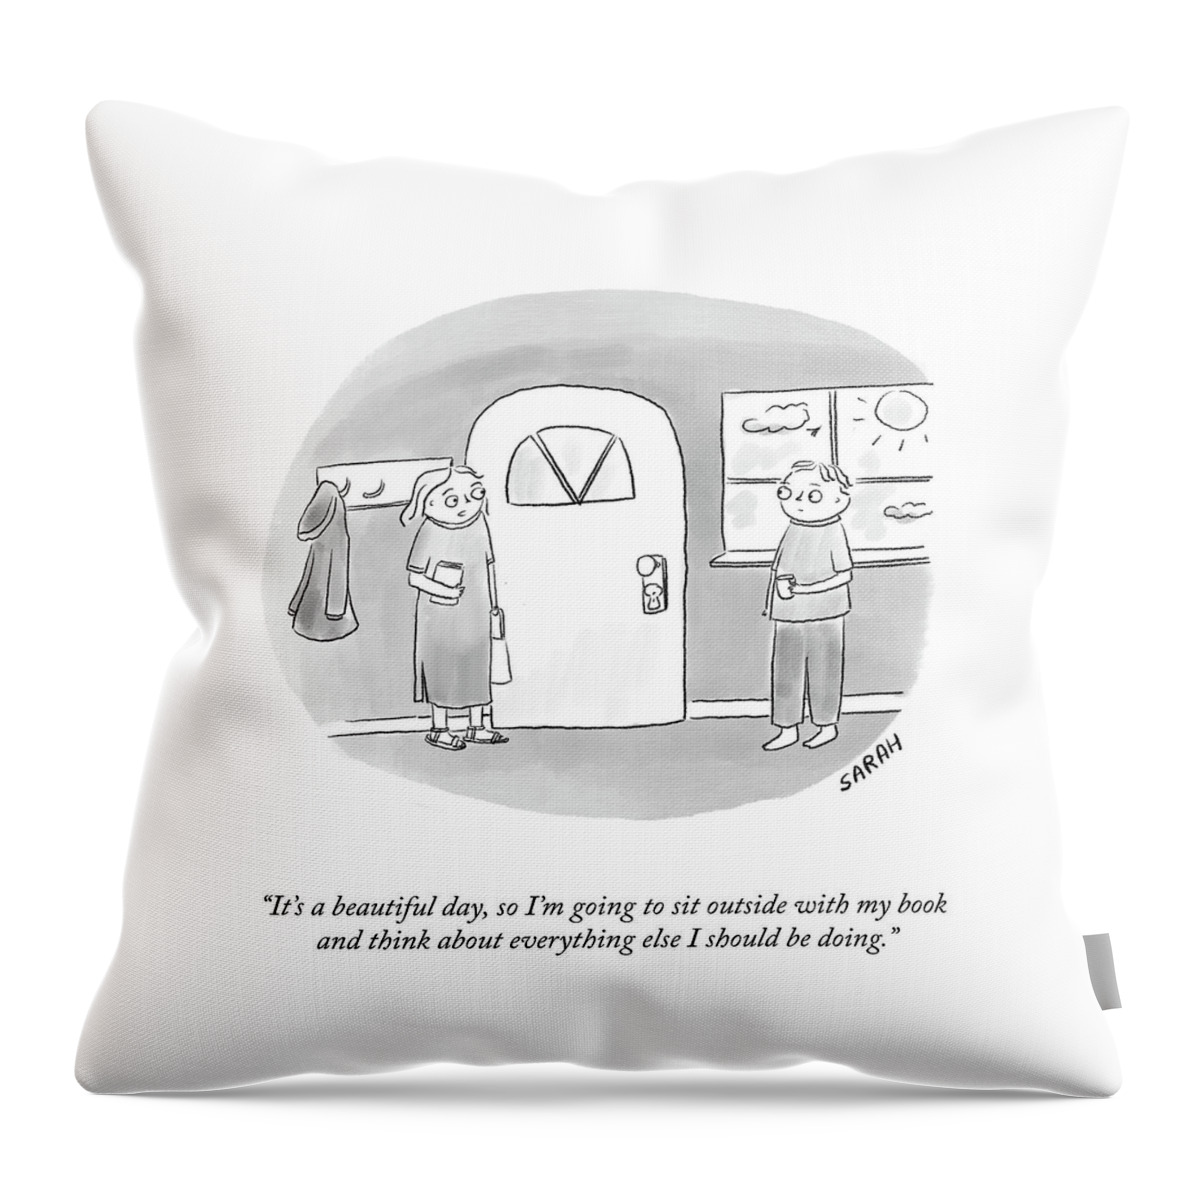 Everything Else I Should Be Doing Throw Pillow